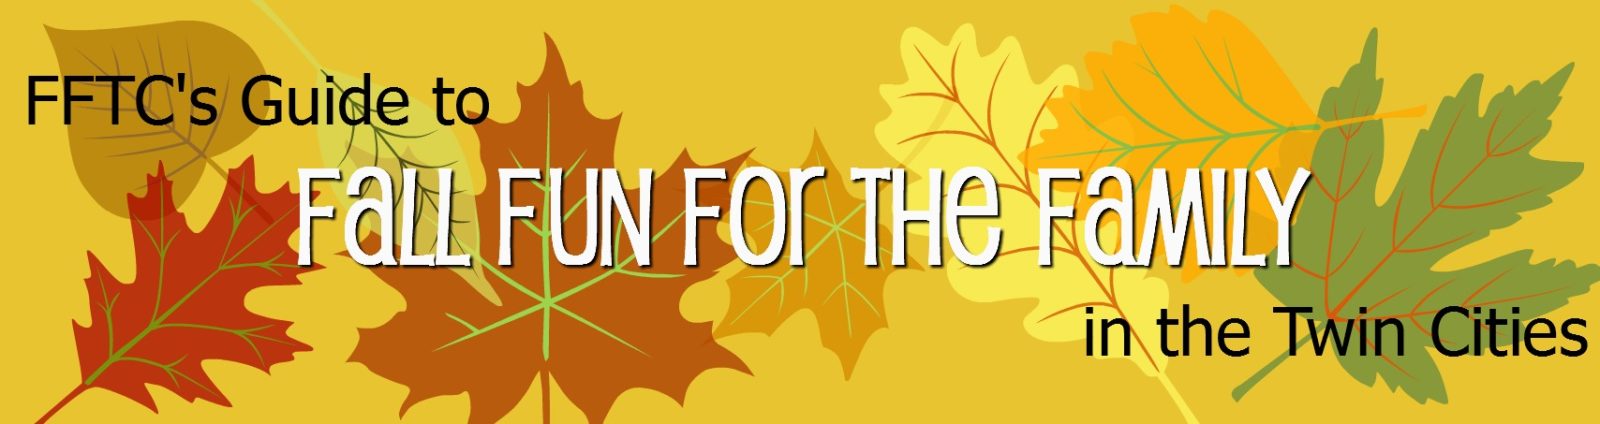 Yellow background with clipart fall leaves: "FFTC's Guide to Twin Cities fall fun for the family in the Twin Cities"